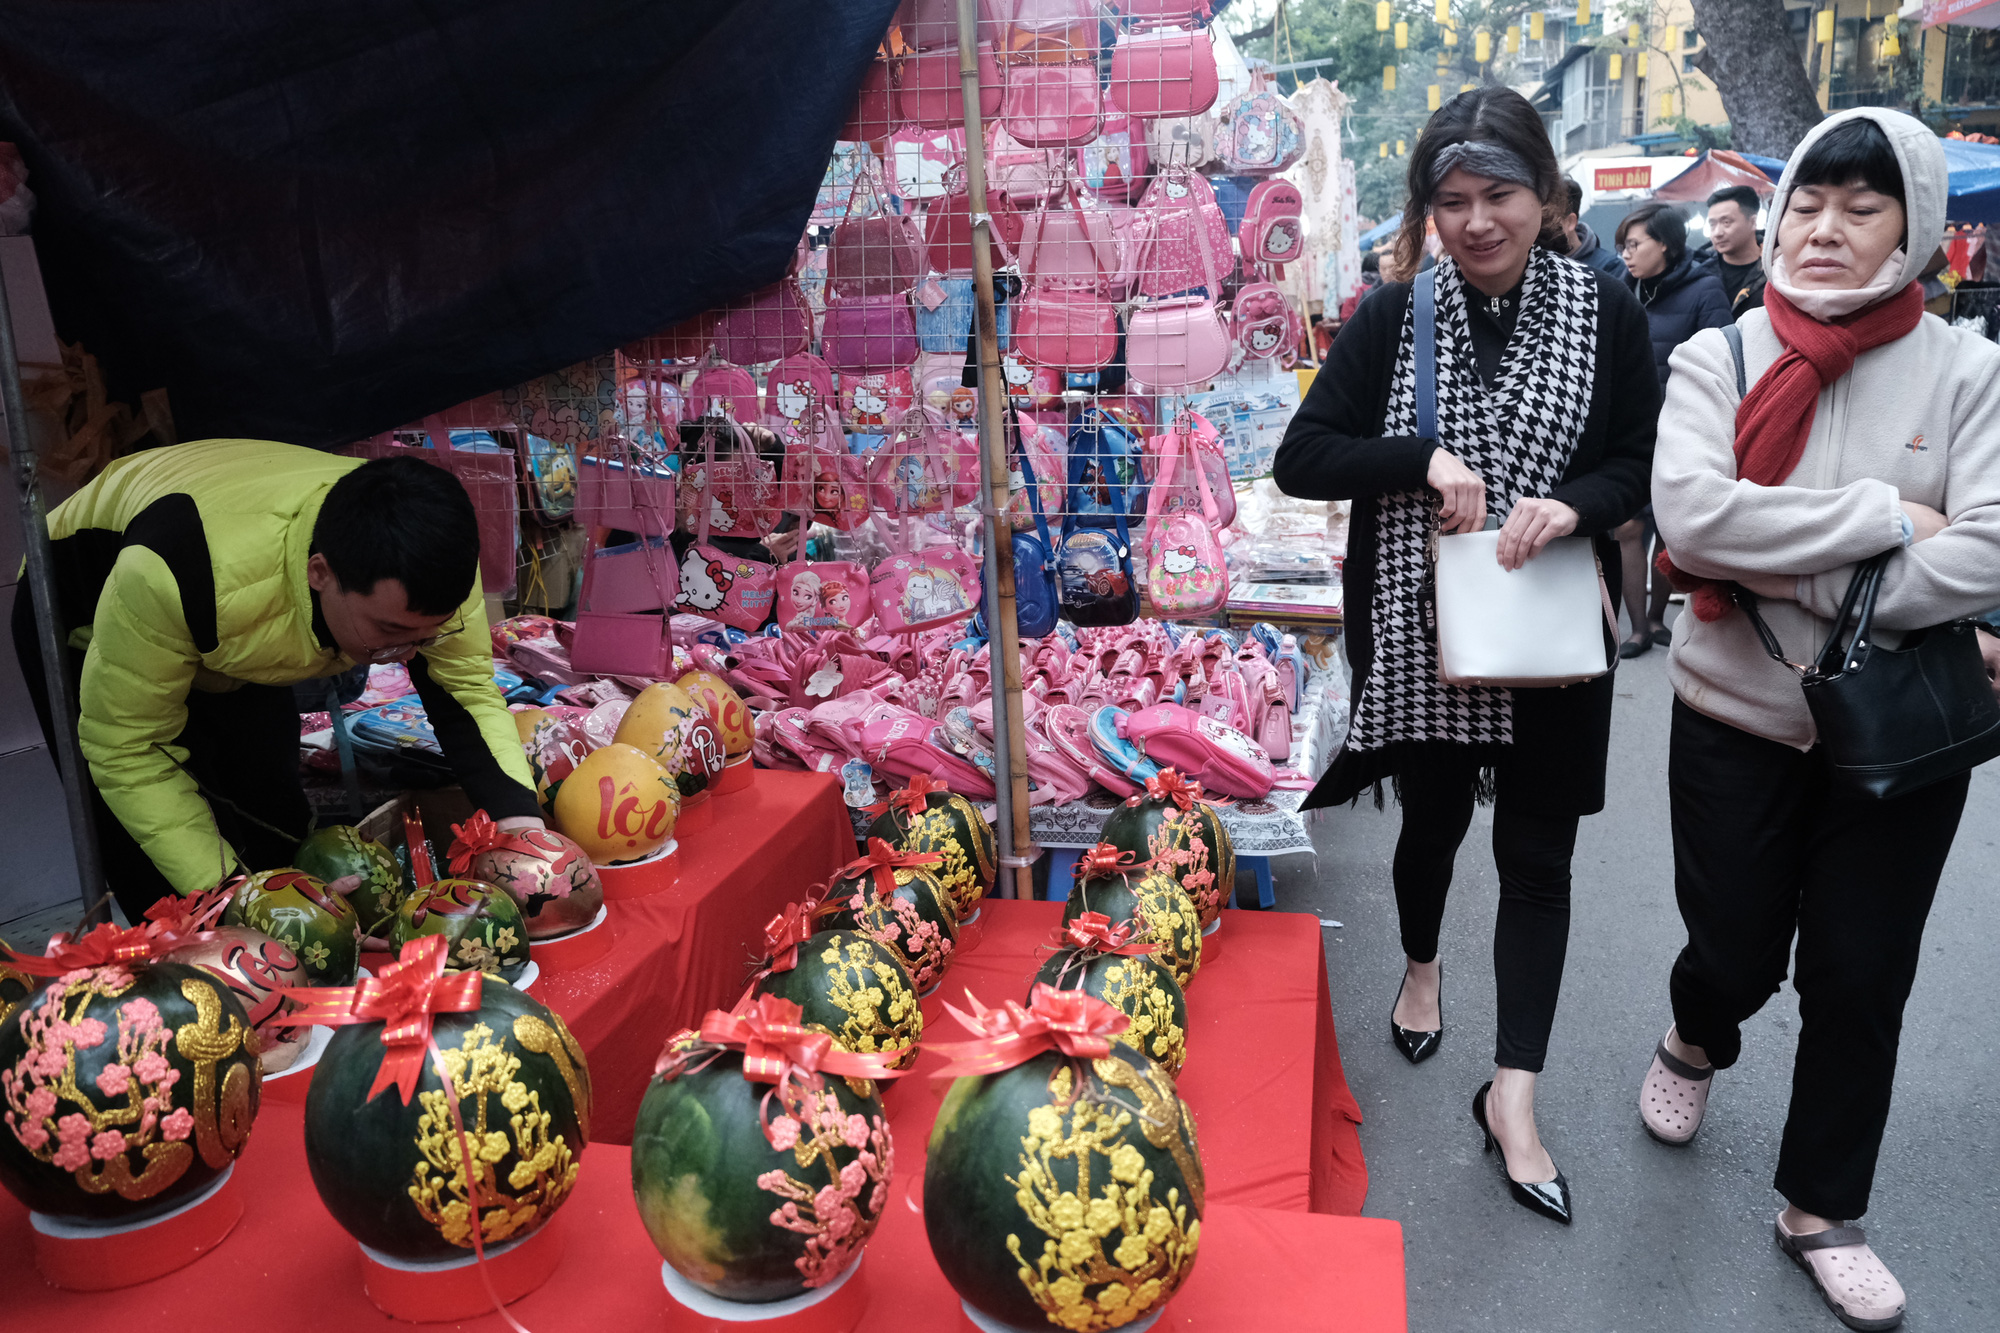 Calligraphic watermelons are sold at the Hang Luoc flower market in Hoan Kiem District, Hanoi. Photo: Mai Thuong / Tuoi Tre